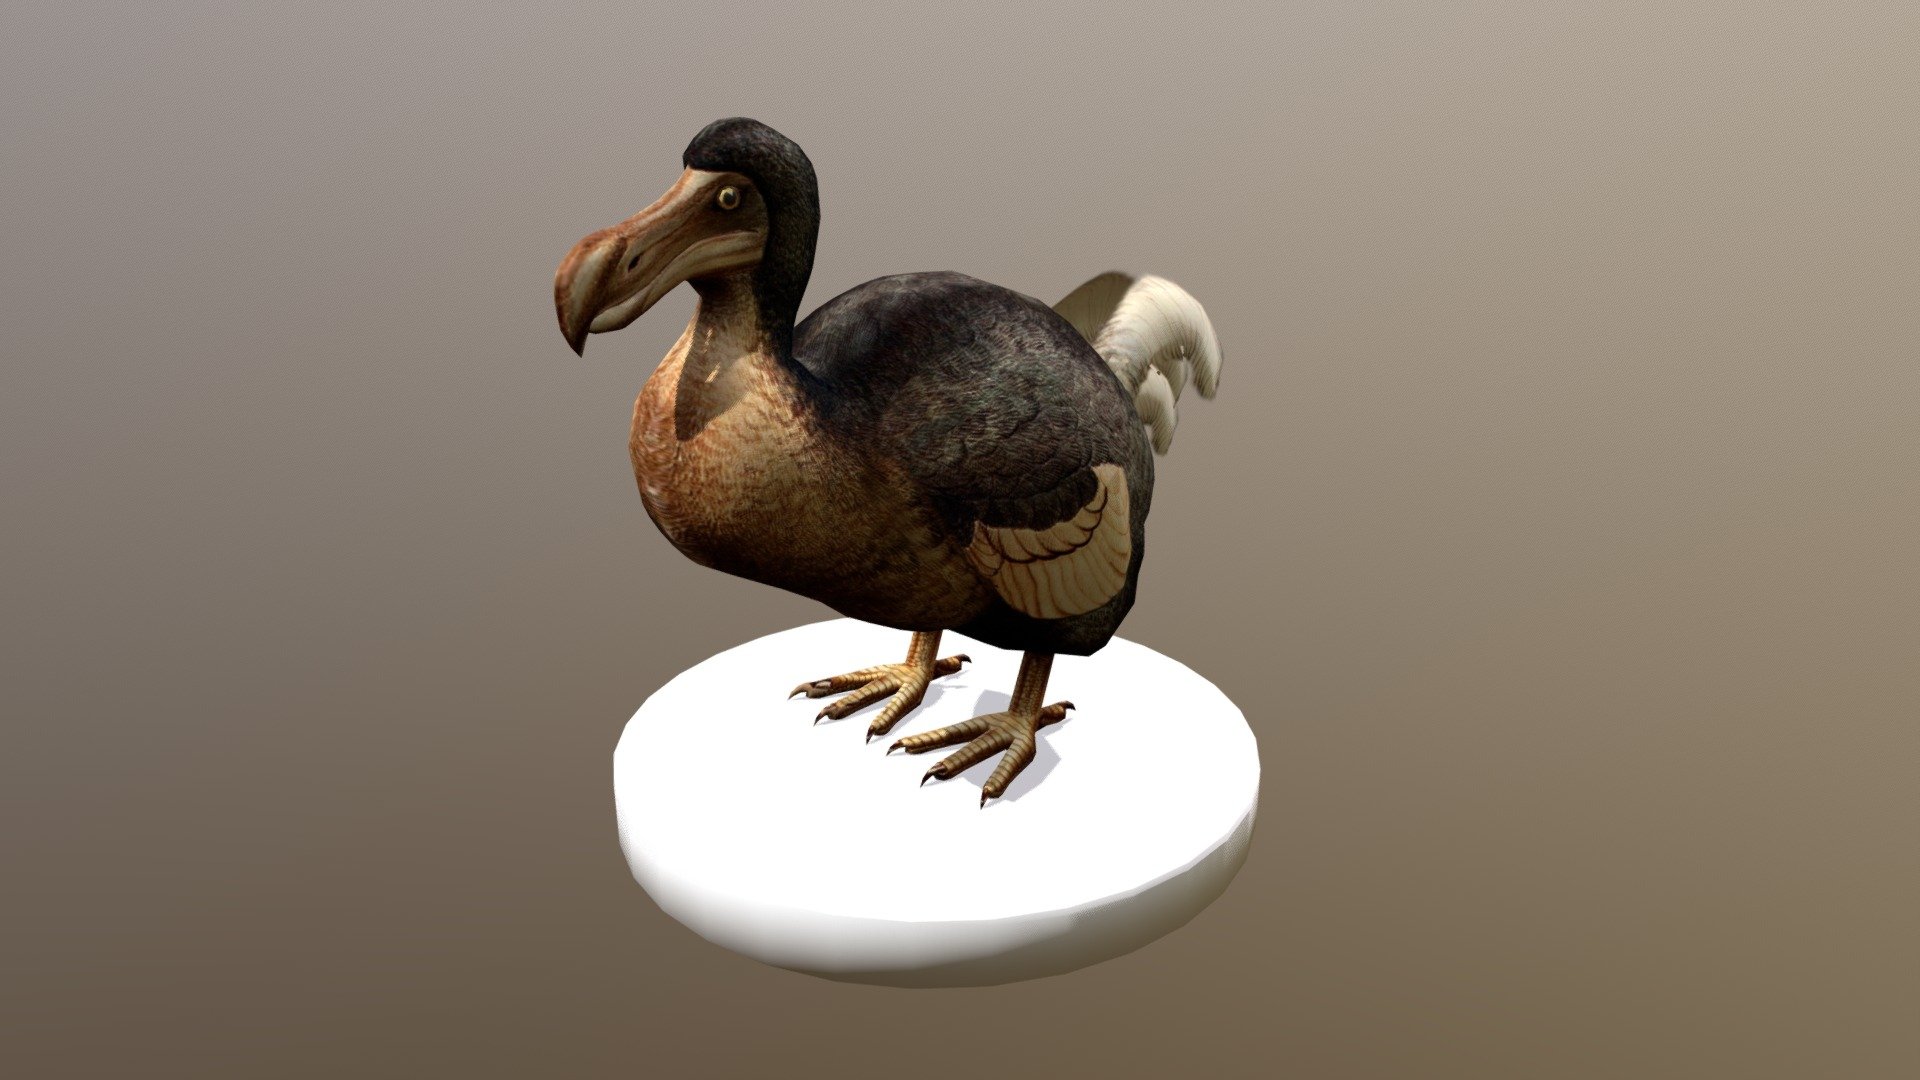 This Dodo Bird illustration is based on Walter Rothschild's book titled Extinct Birds. Please note that this depiction of Dodo Bird is incorrect today based on recent paleontological researches.

The texture is based on Frederick William Frohawk's reconstruction of the illustration on said book.

Both the original book and the illustration reconstruction are in public domain and taken from Wikimedia Commons.

Click here for more details 3d model